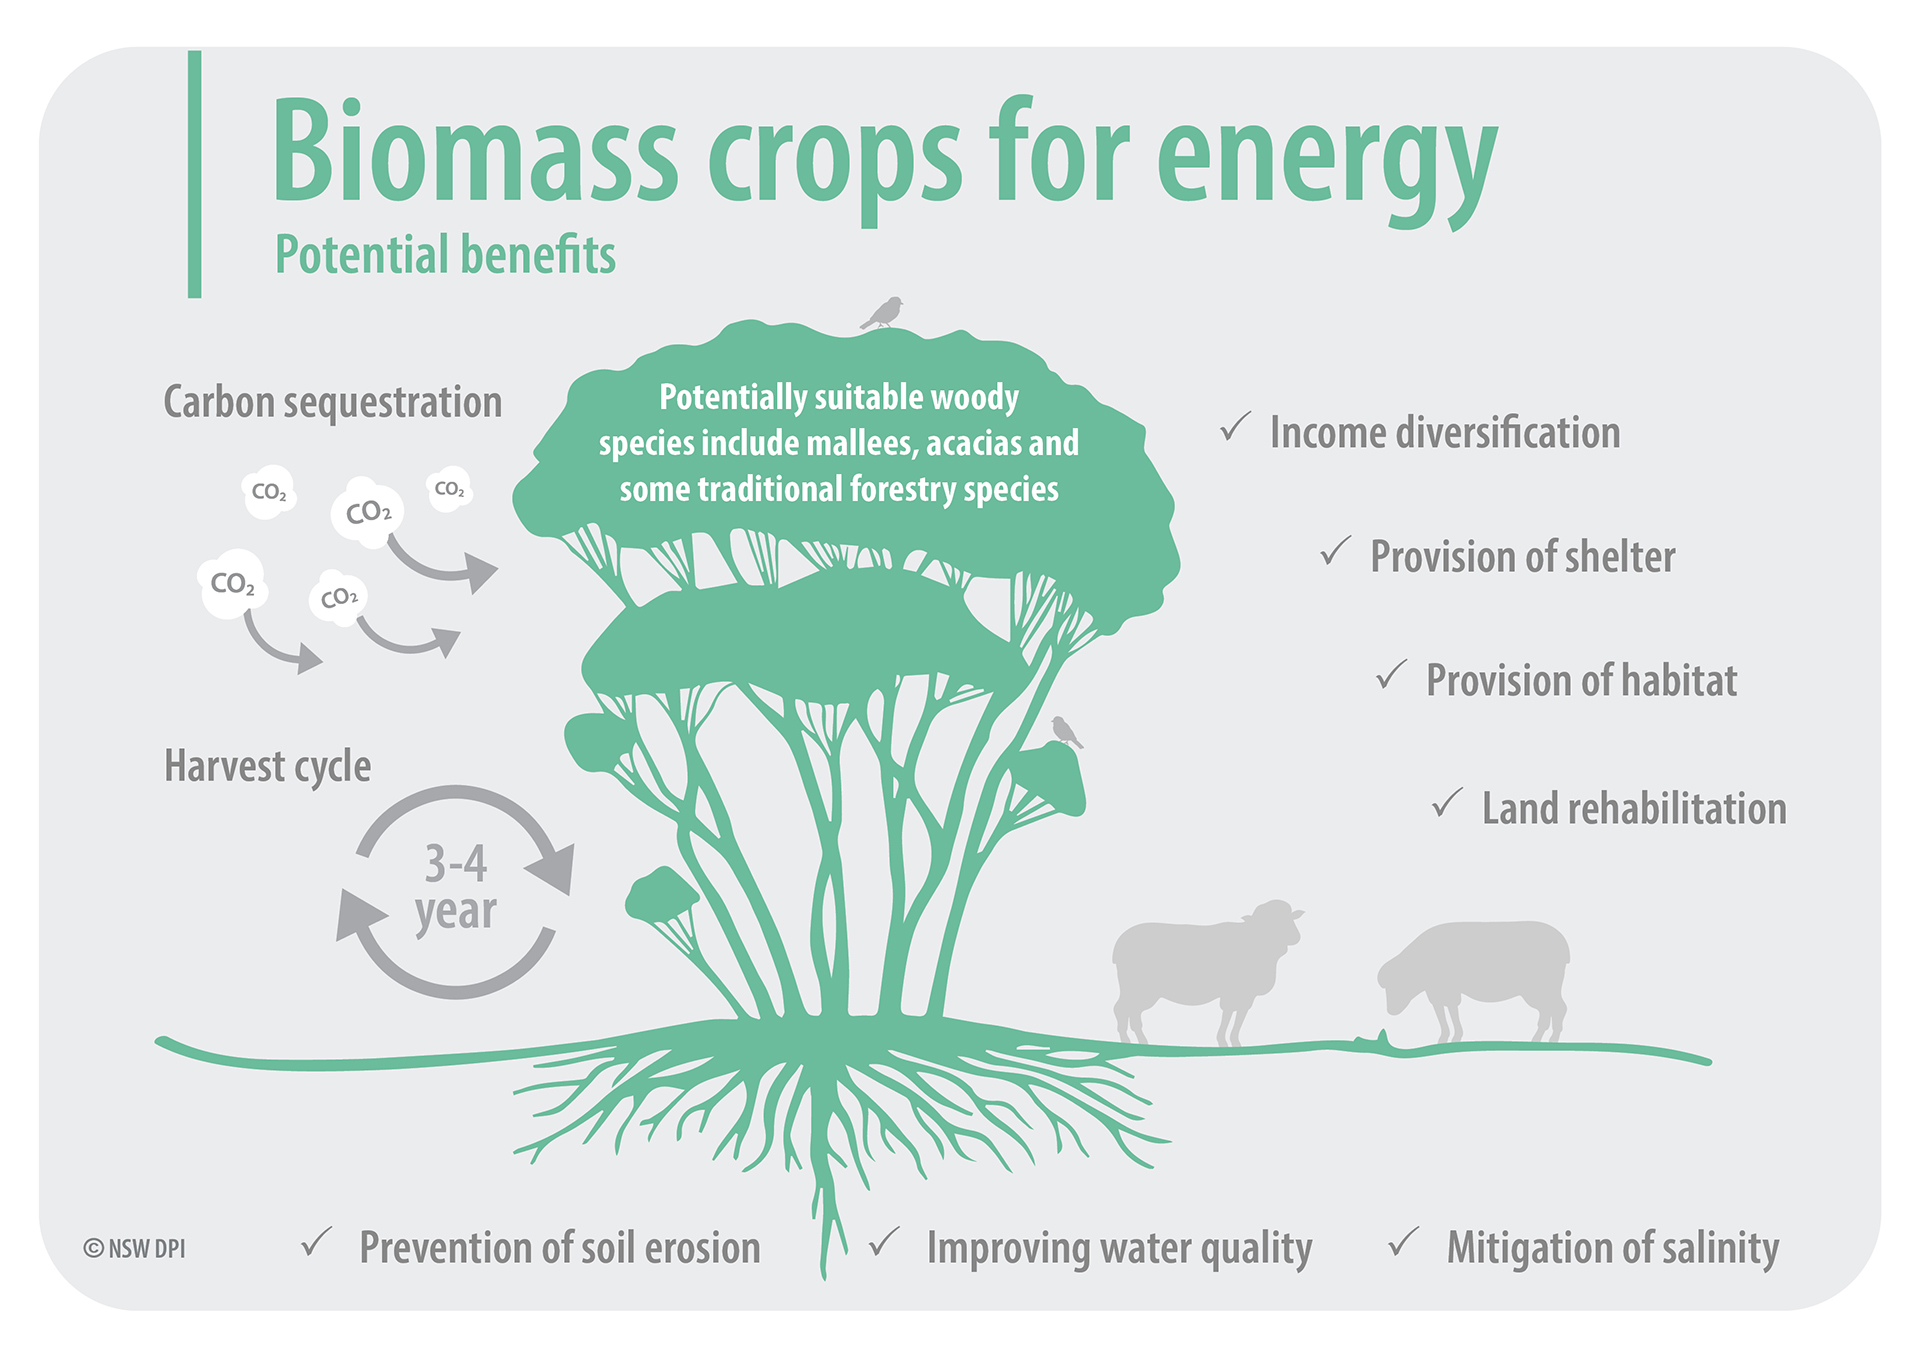 Infographic of biomass crops for energy - potential benefits. This document is not fully accessible, please contact fabiano.ximenes@dpi.nsw.gov.au for more information.